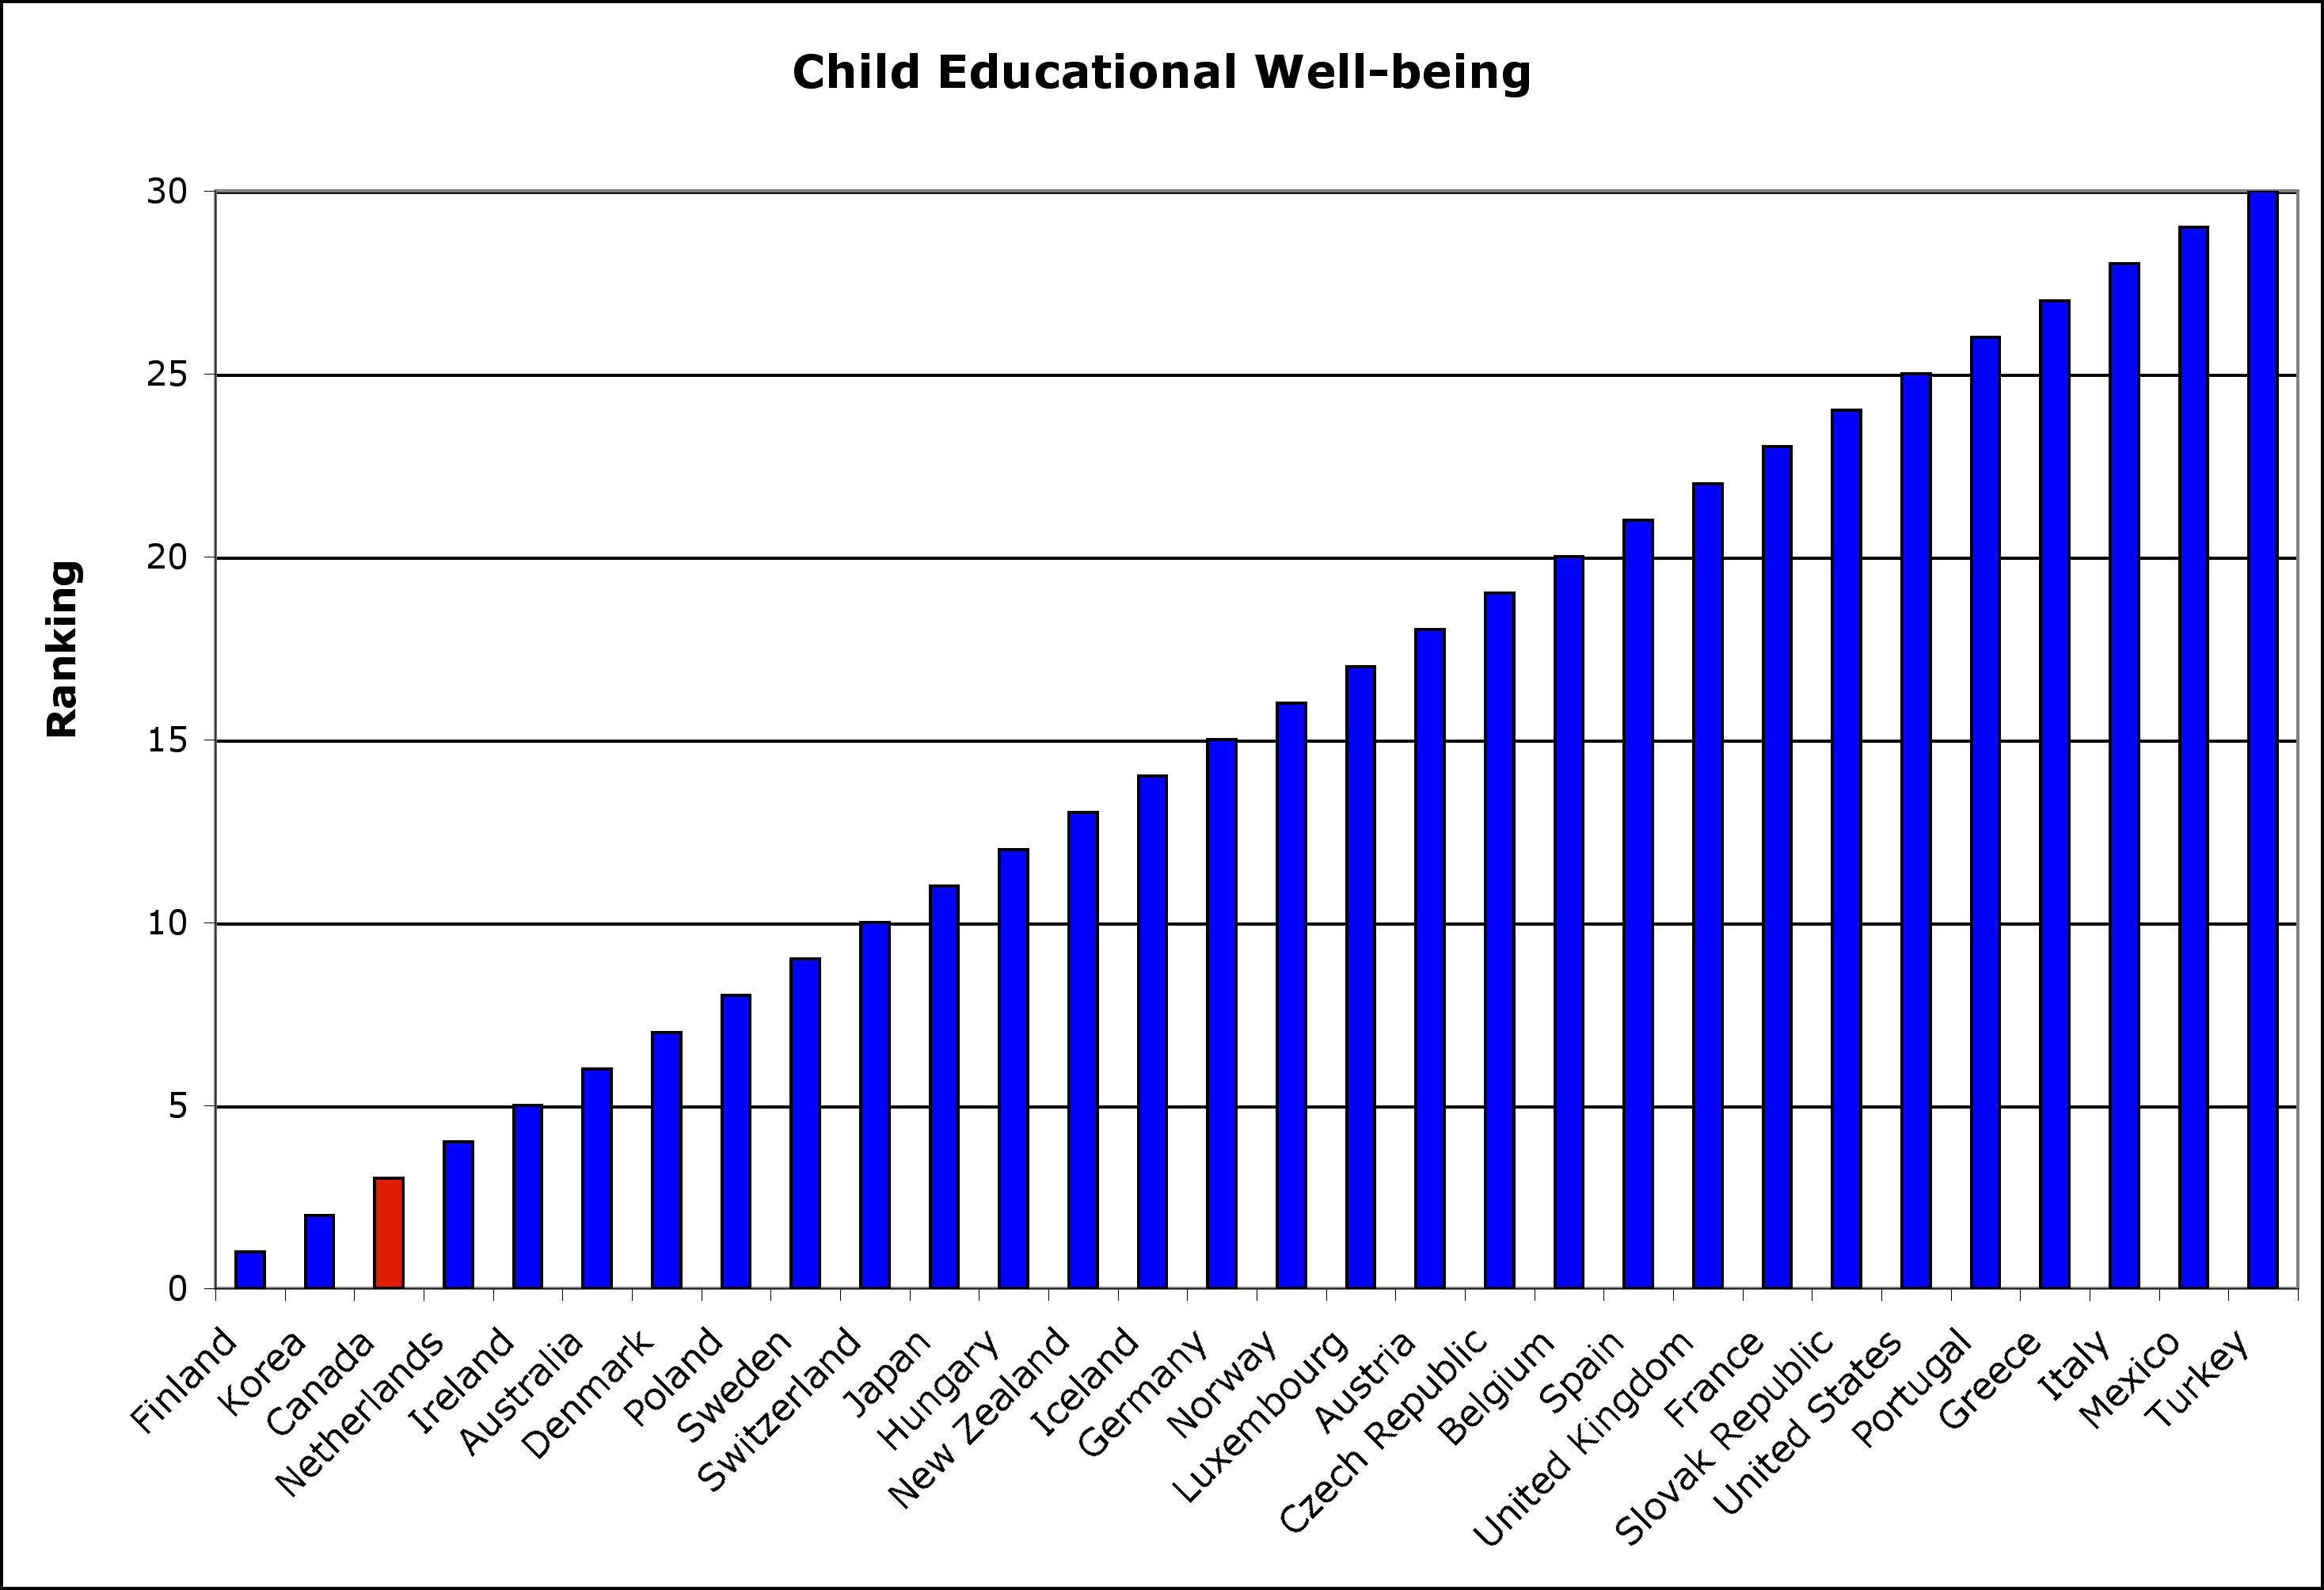 OECD Educational well-being